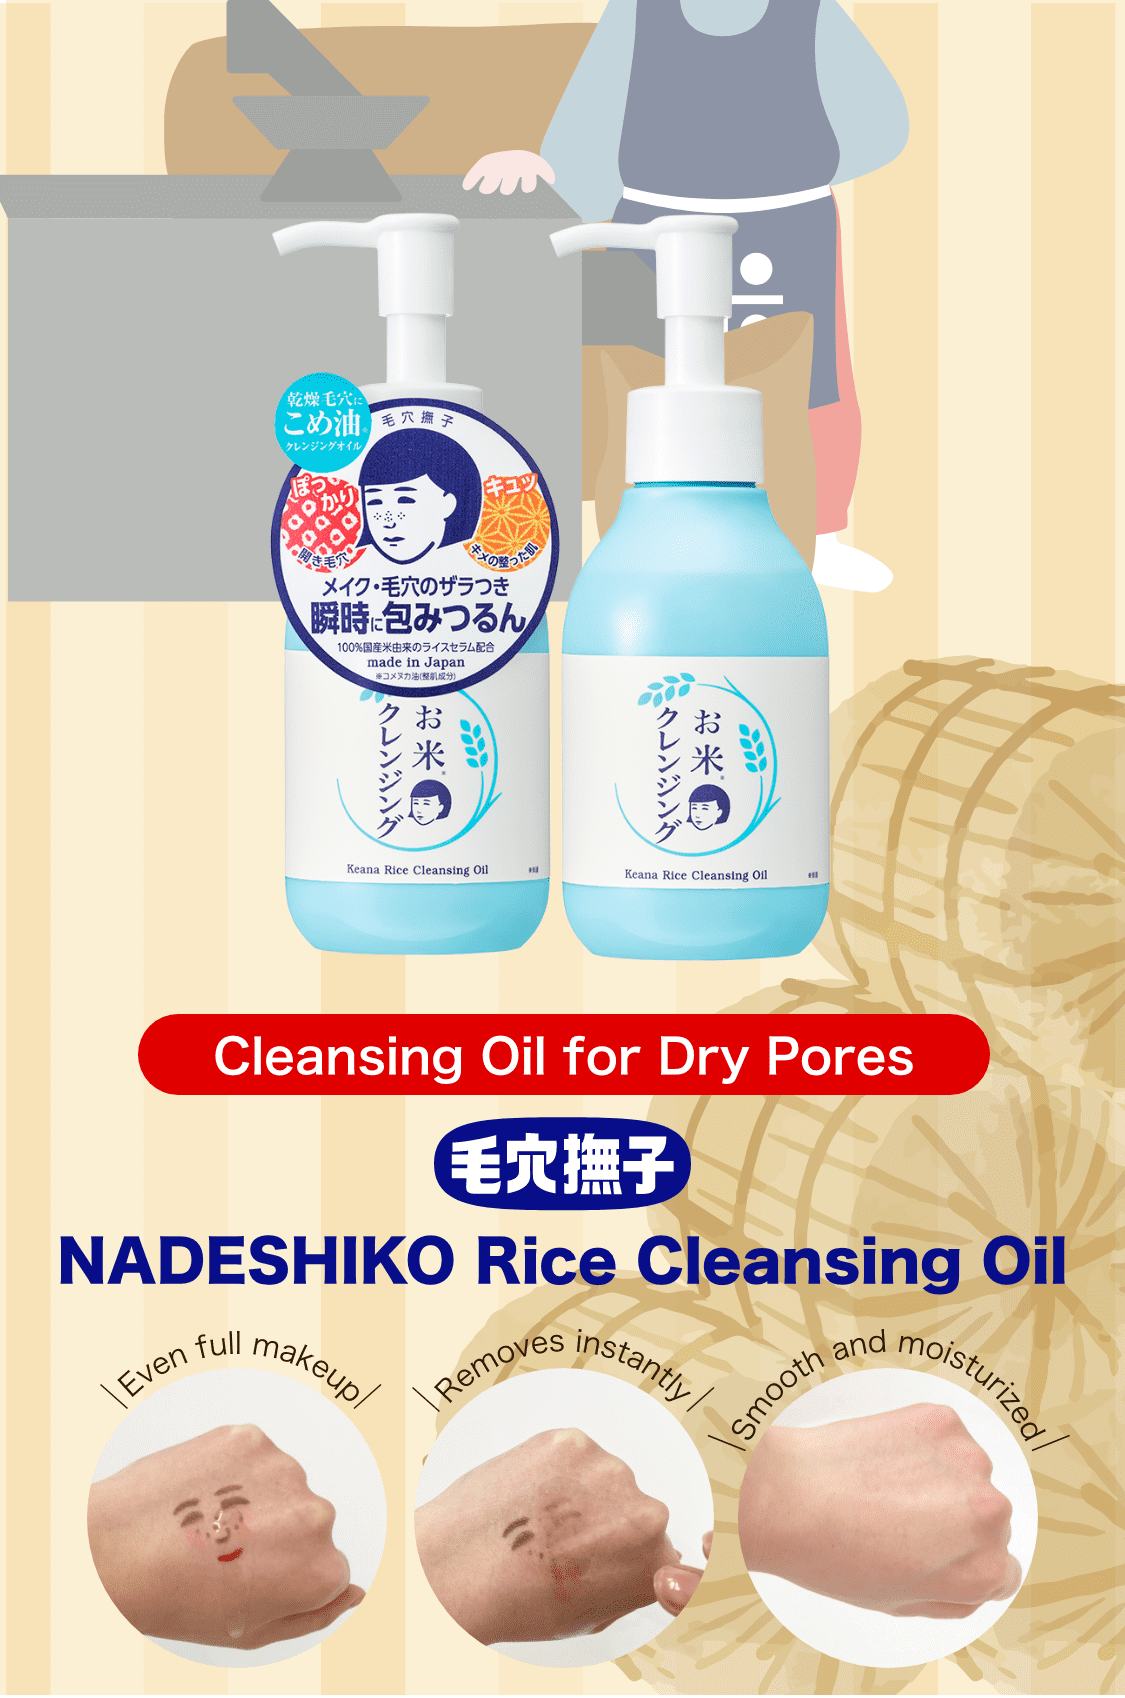 Cleansing Oil for Dry Pores NADESHIKO Rice Cleansing Oil